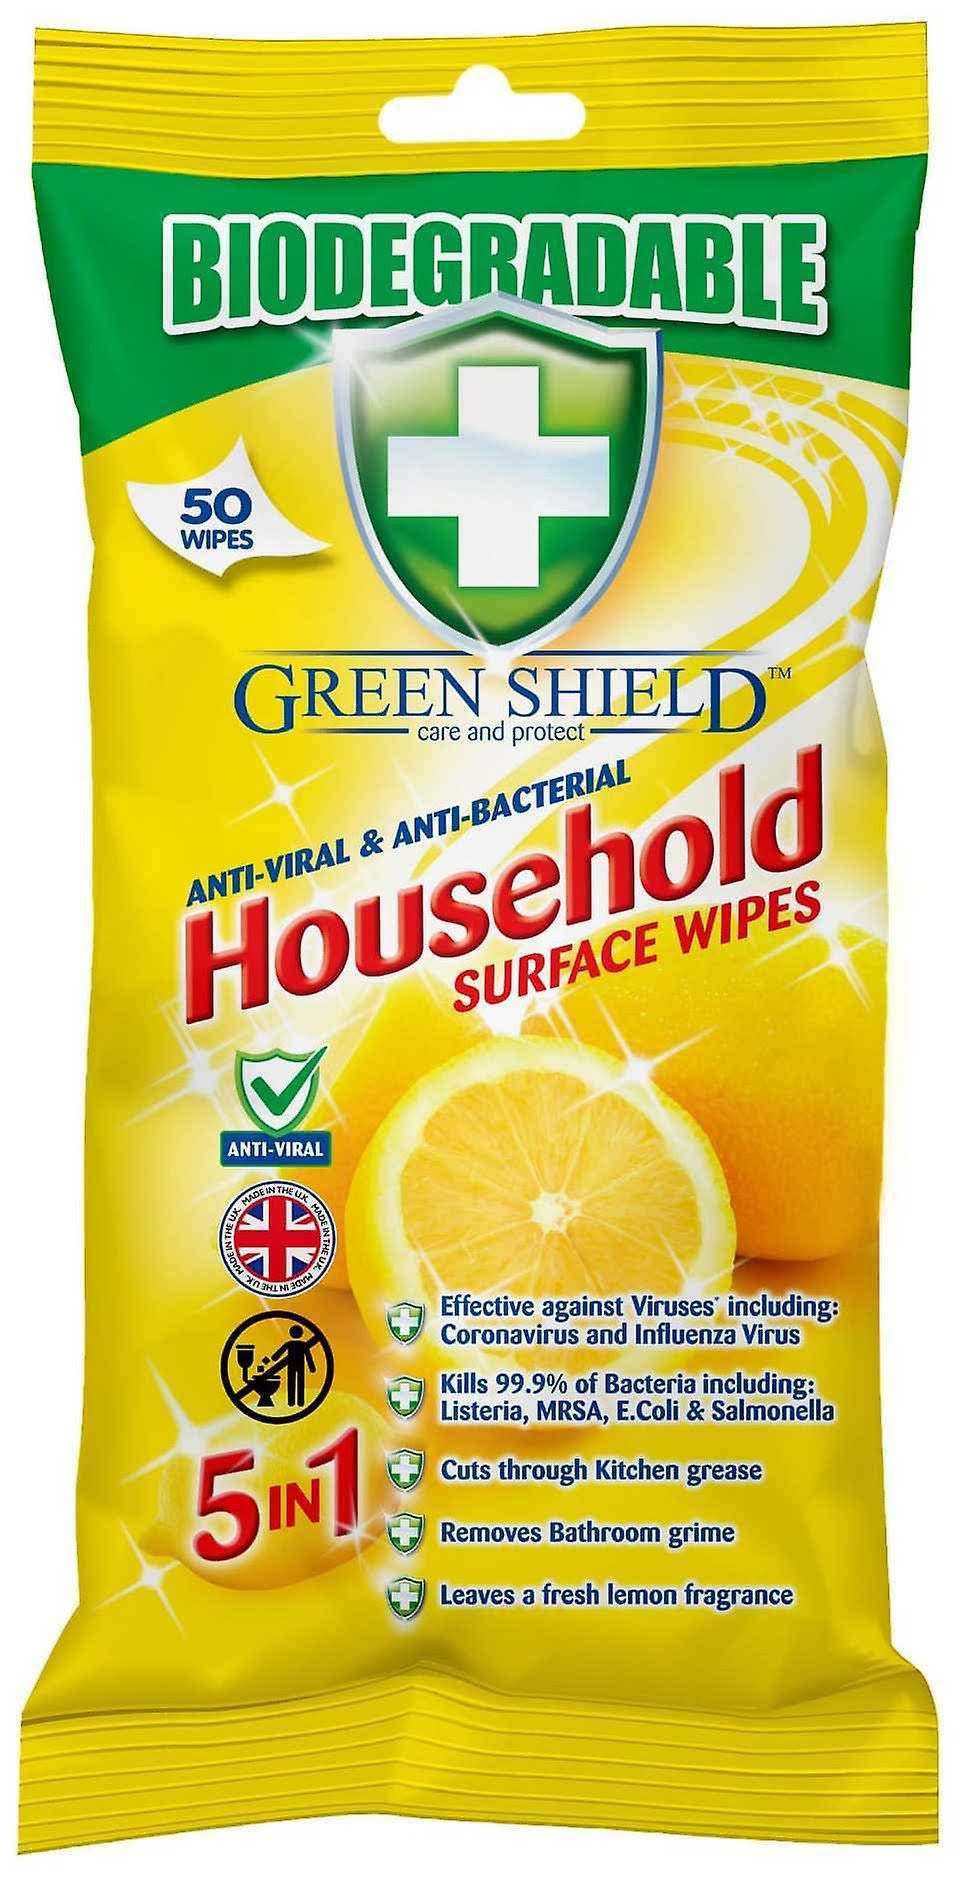 Greenshield Biodegradable Antiviral and Anti-Bacterial Surface Wipes for Home, 50 Wipes